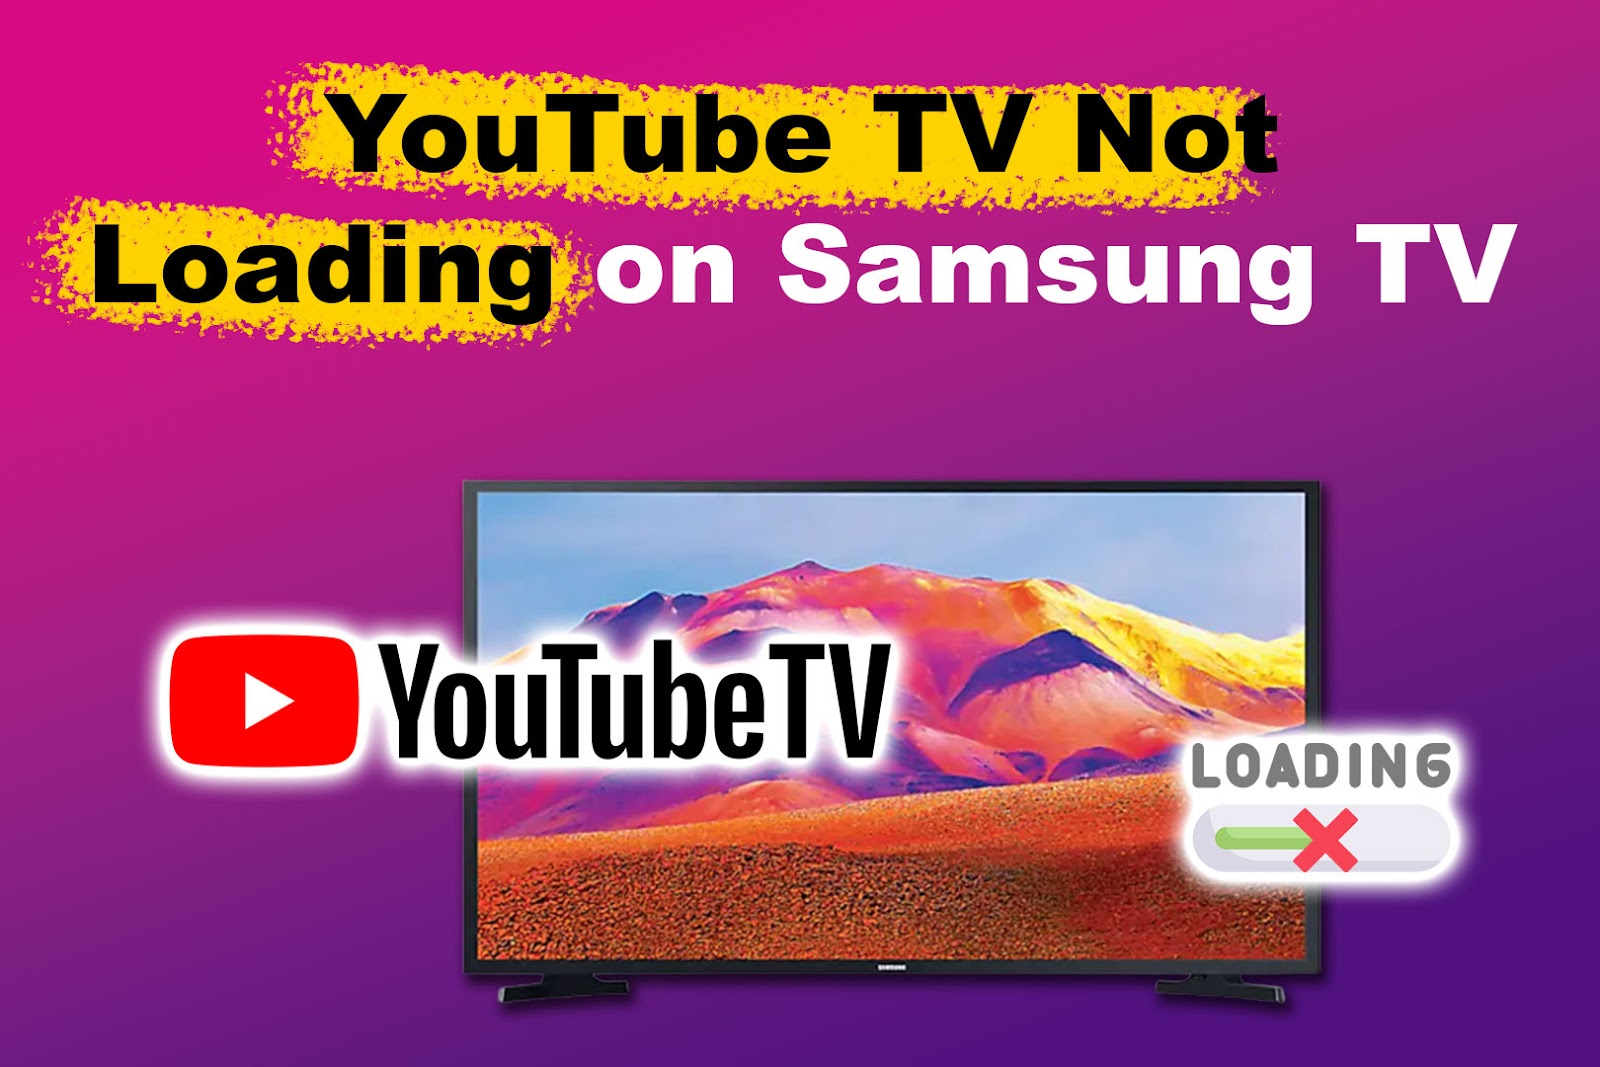 Why Is YouTube TV Not Loading on Samsung TV